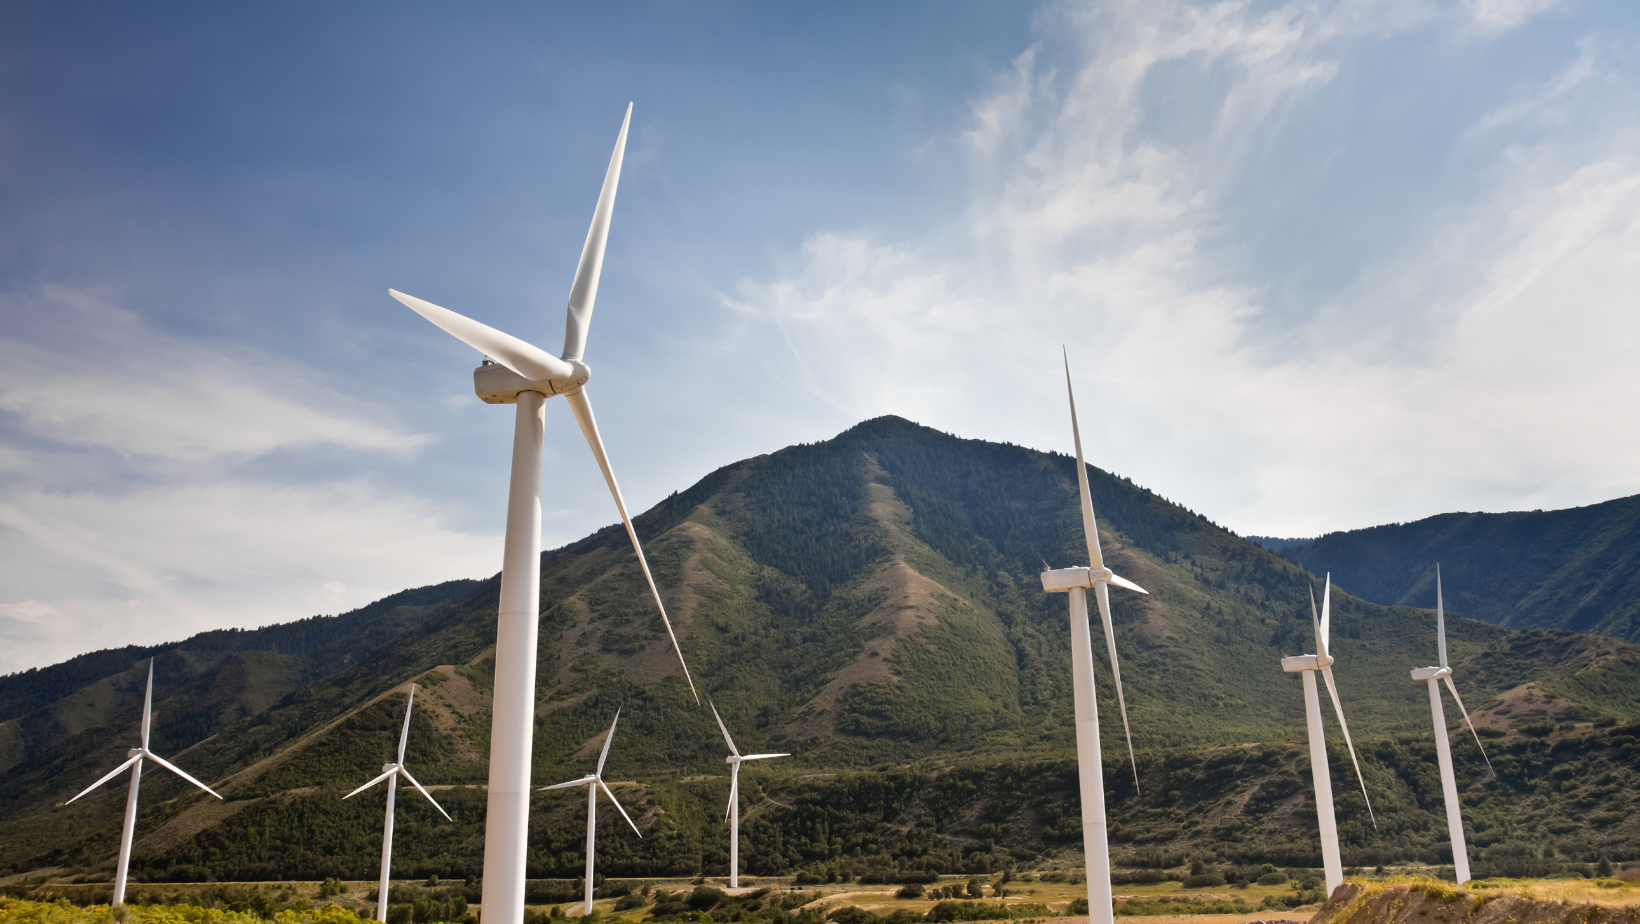 Challenges faced by the wind energy industry